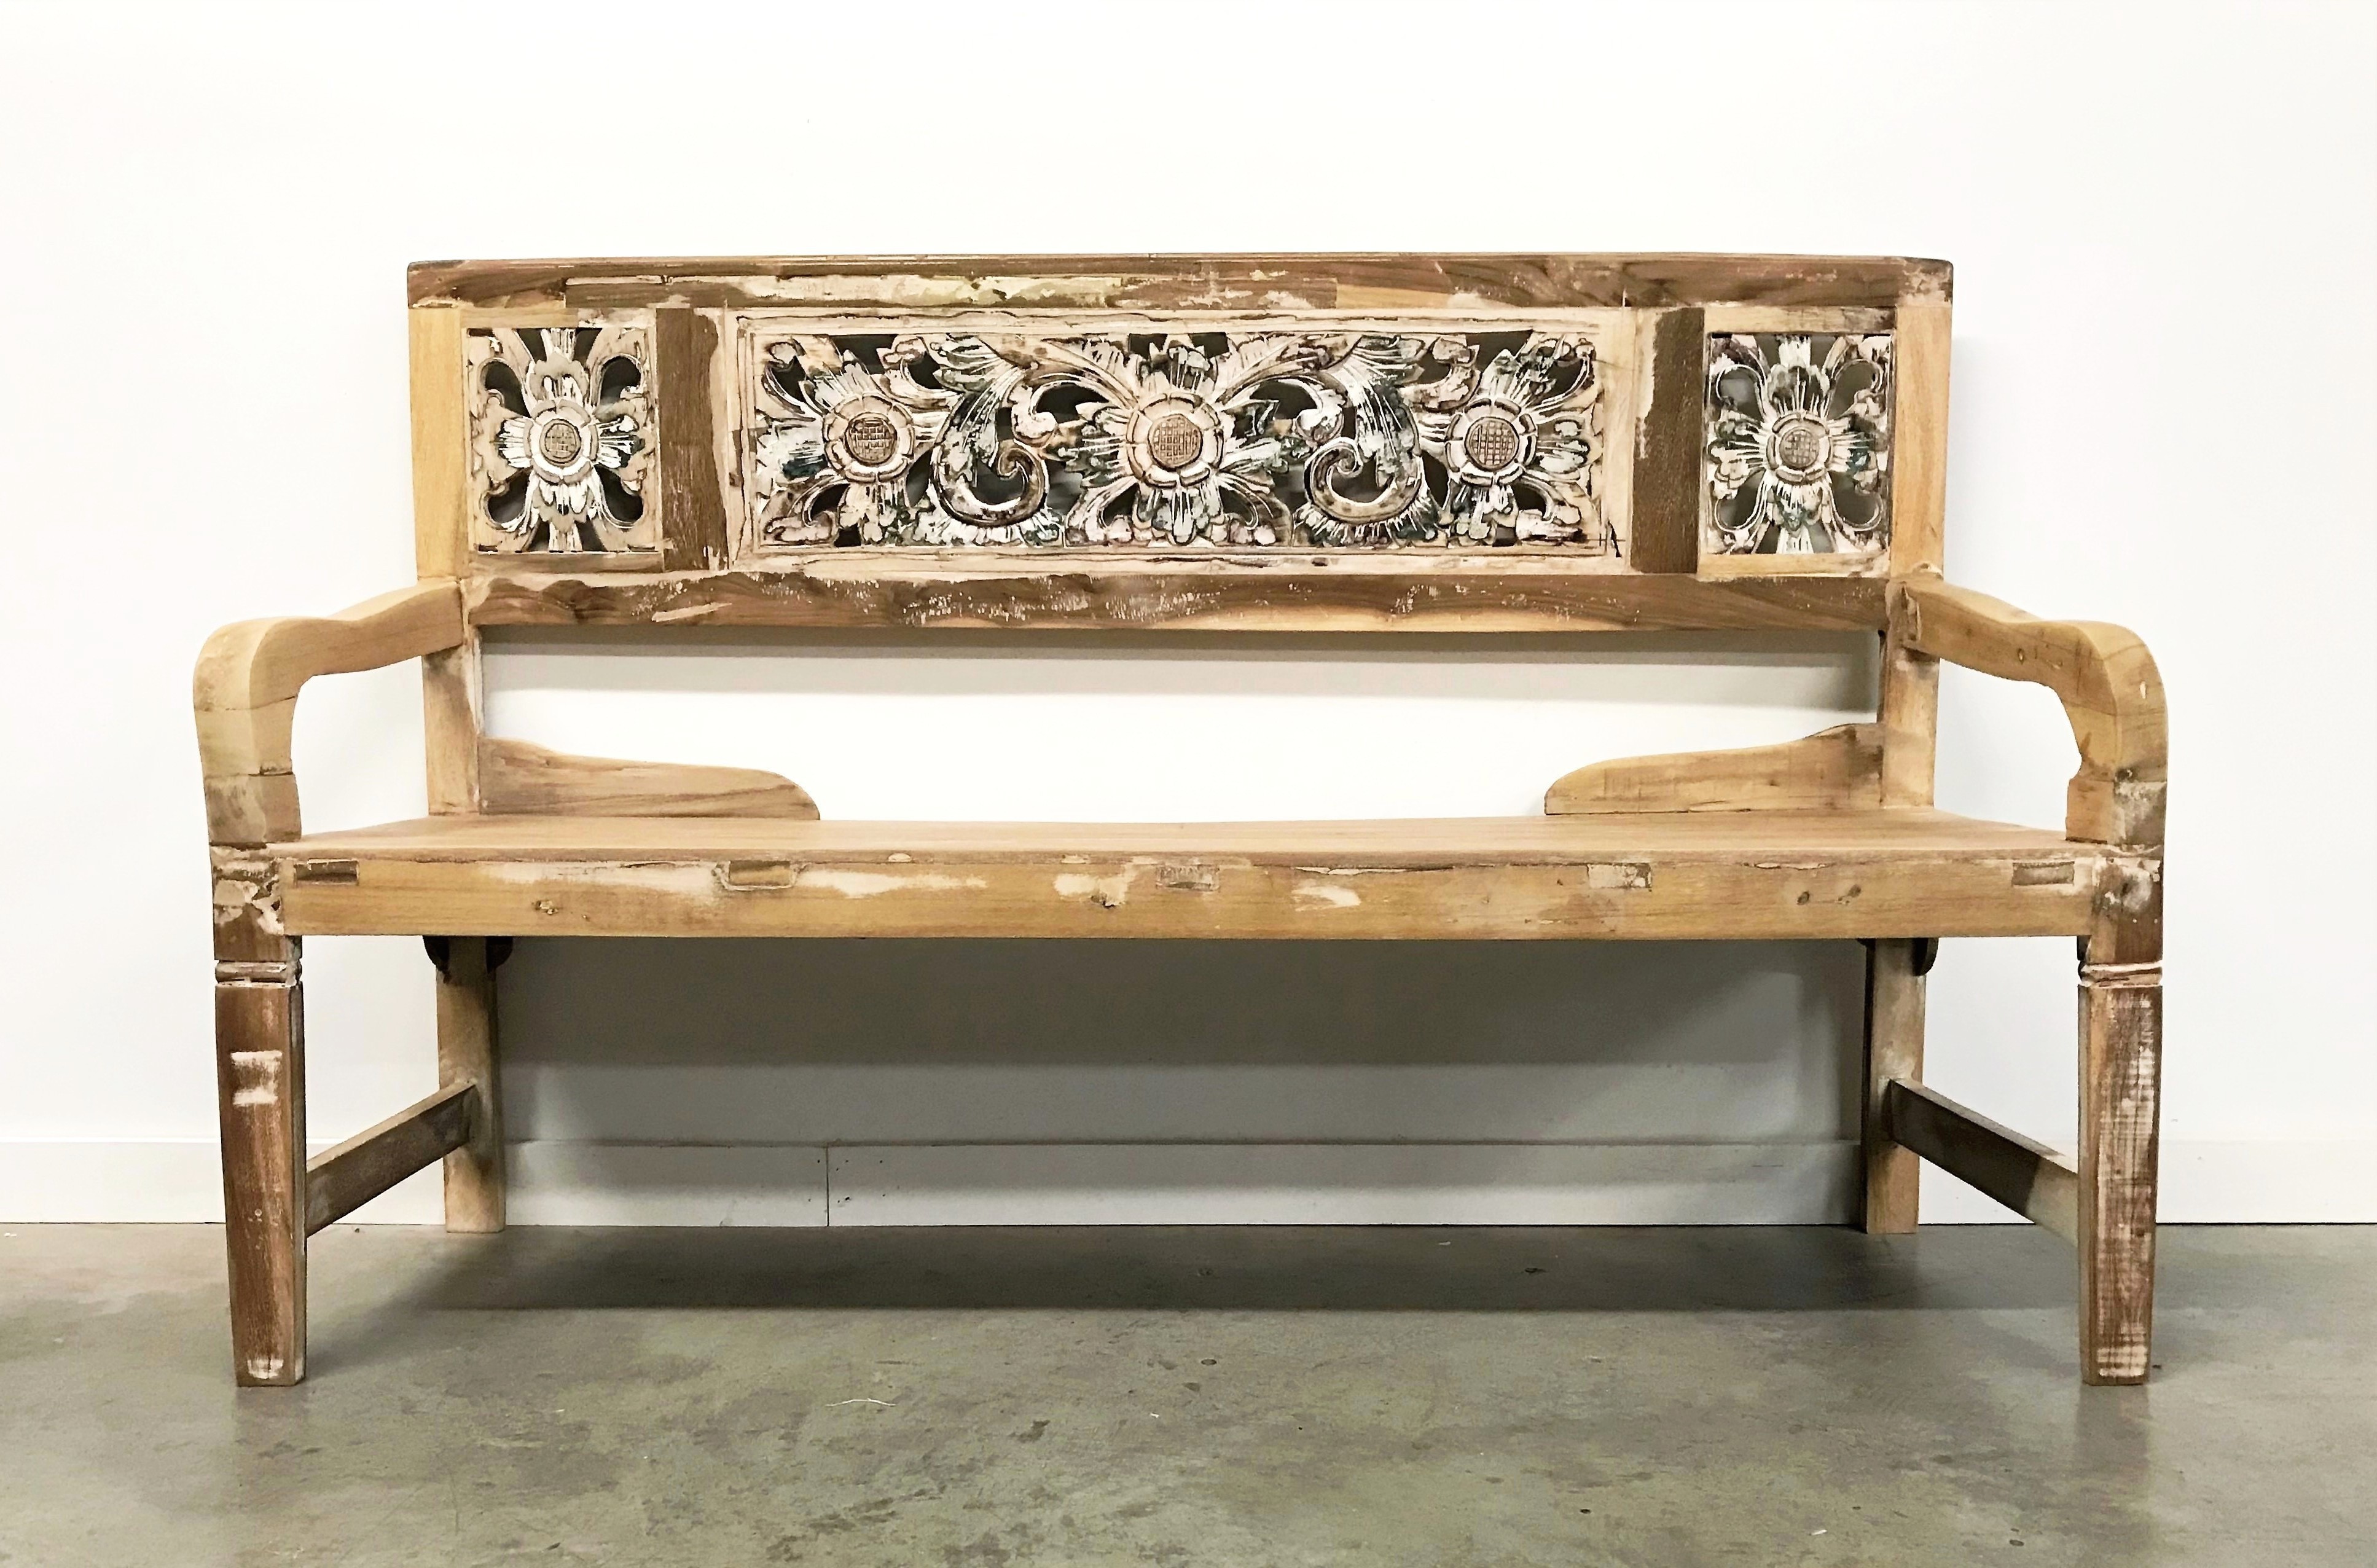 Carved Whitewashed Reclaimed Wood Bench